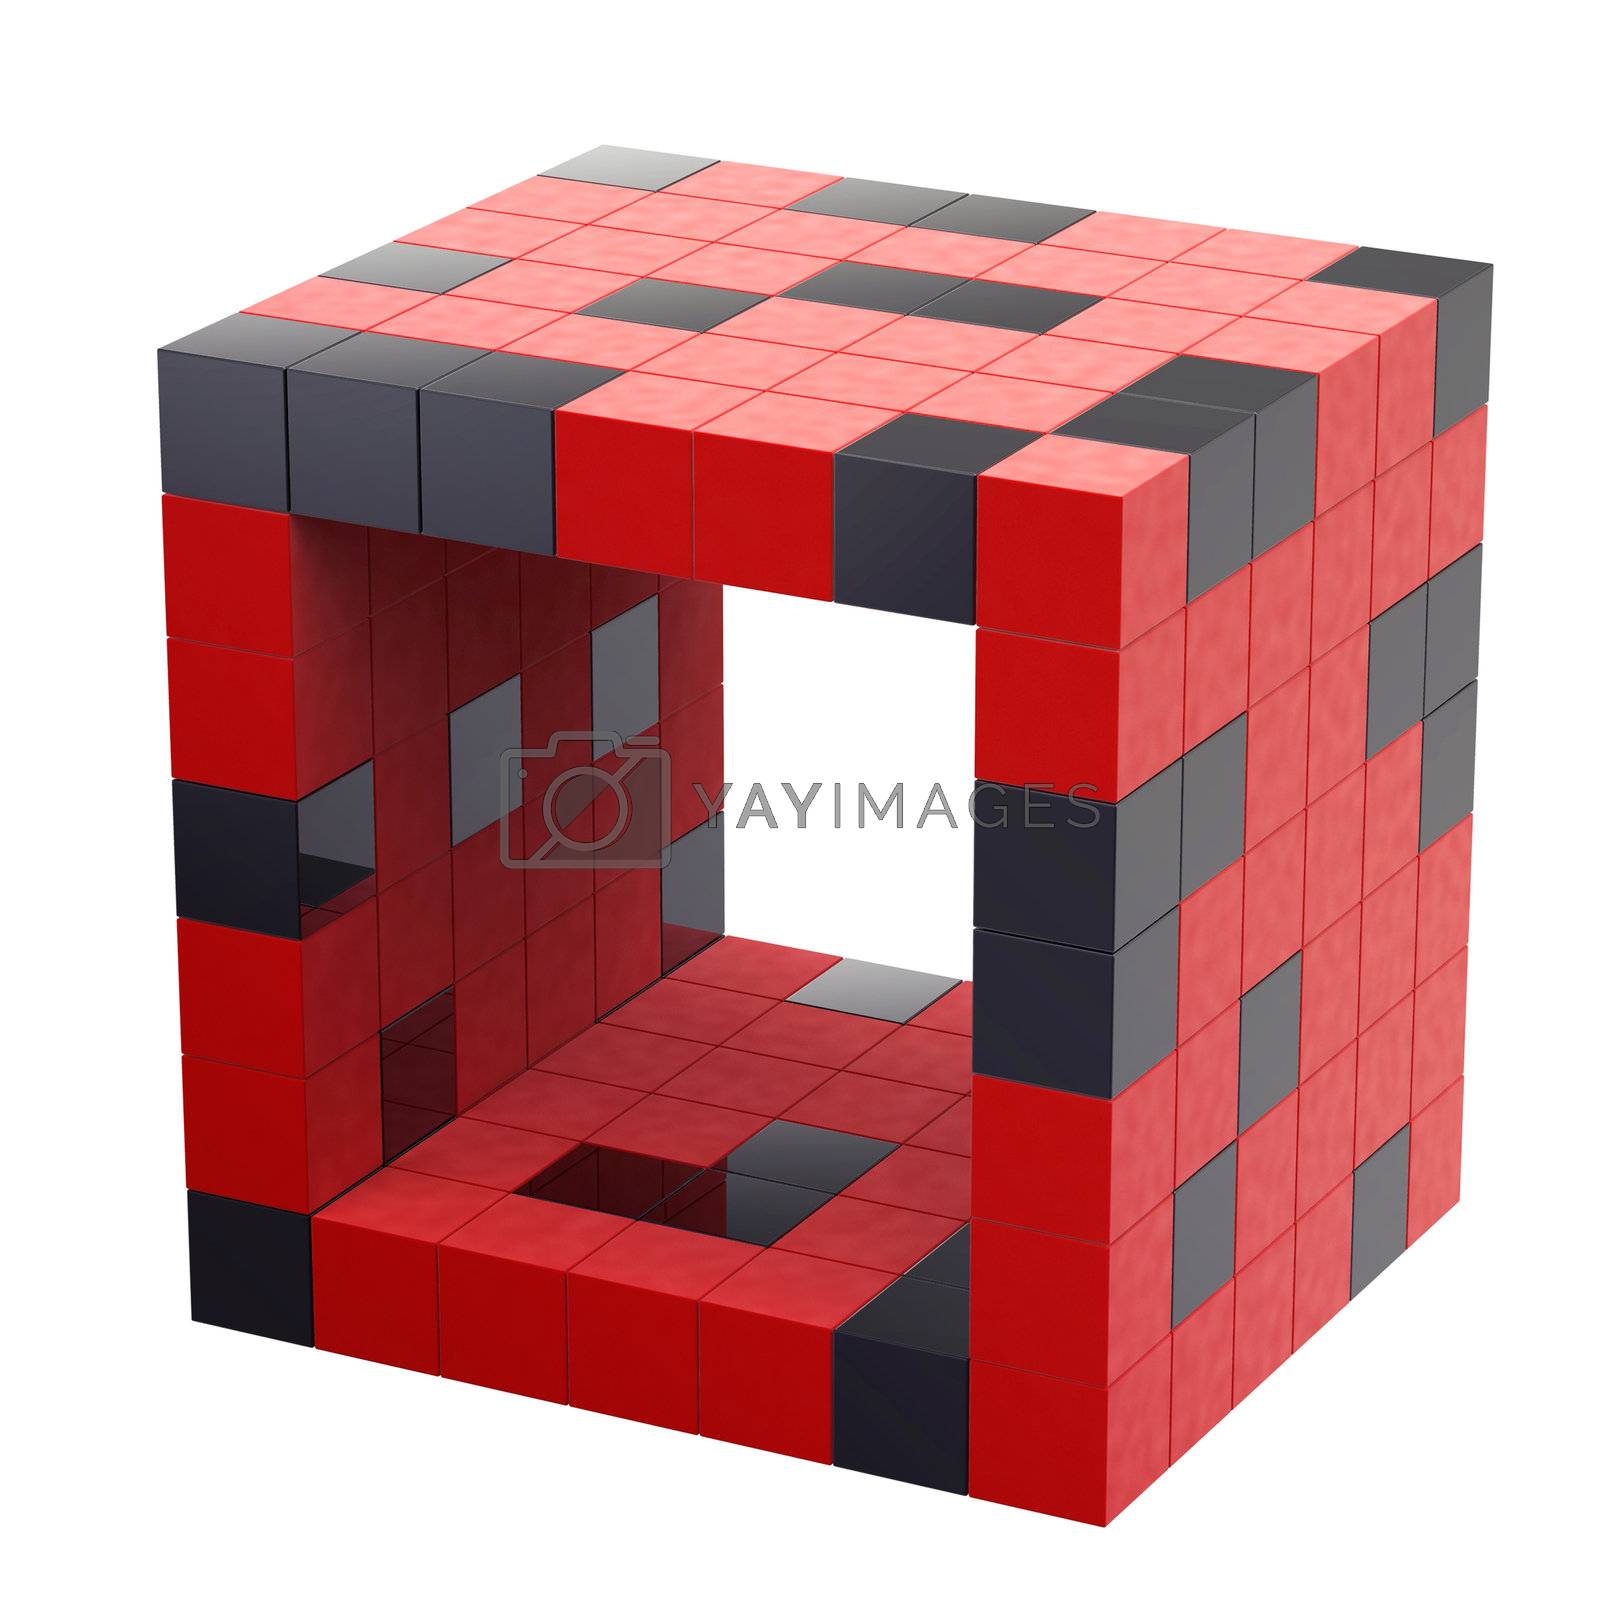 Royalty free image of isolated Red futuristic 3d cube by JimmyMaslo